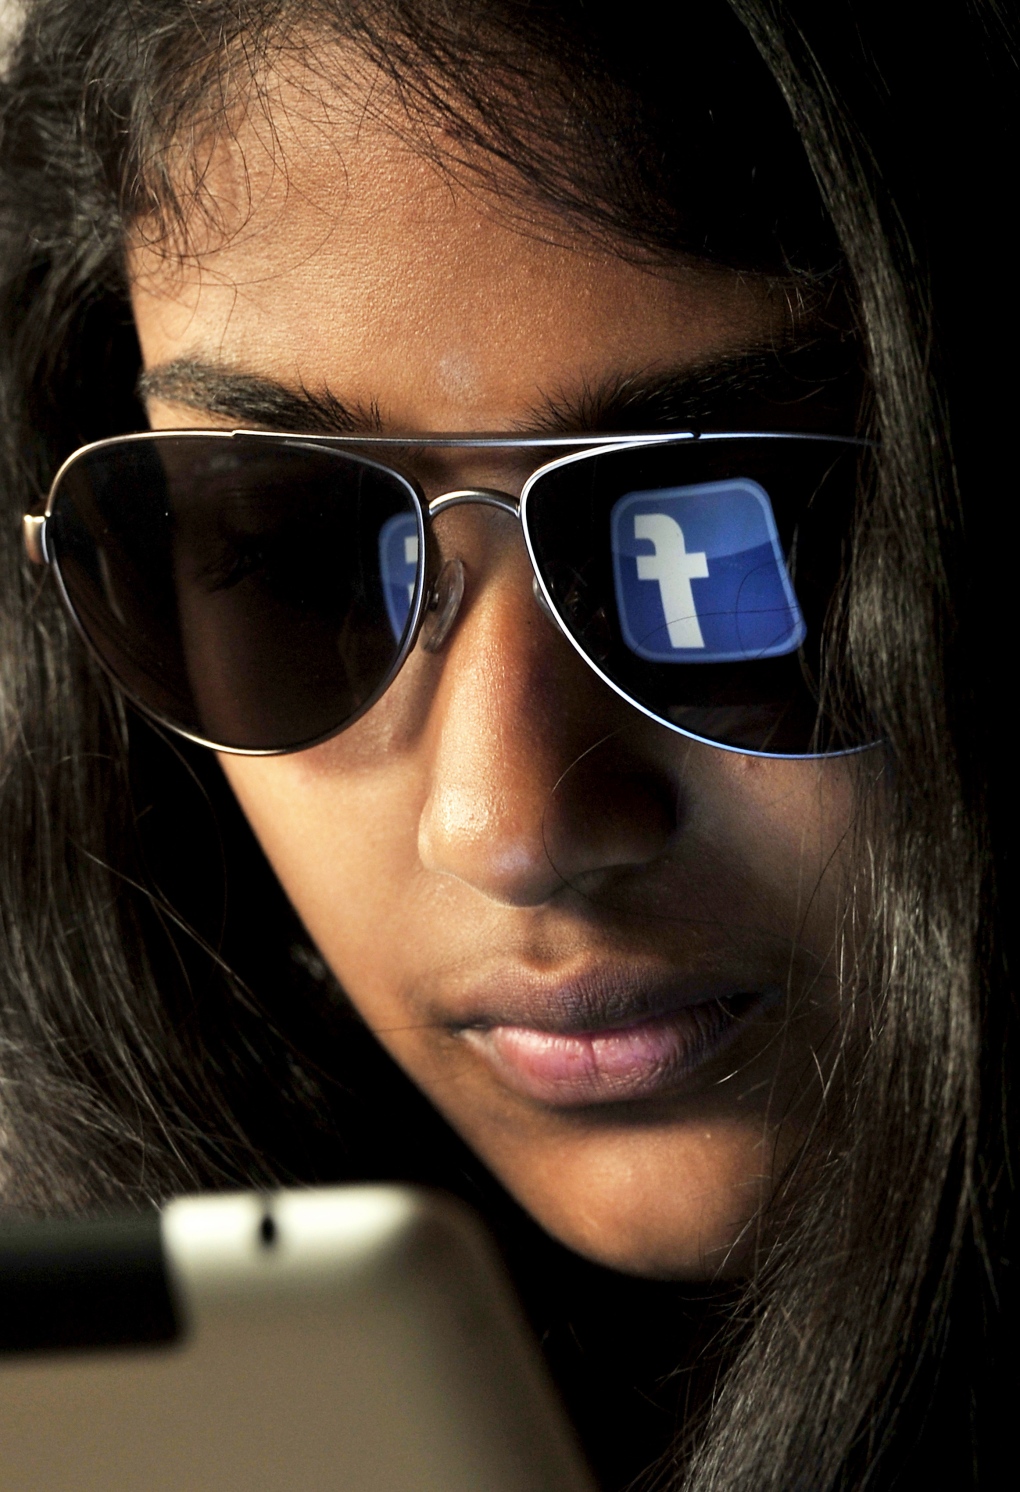 Facebook hits 100M users in India